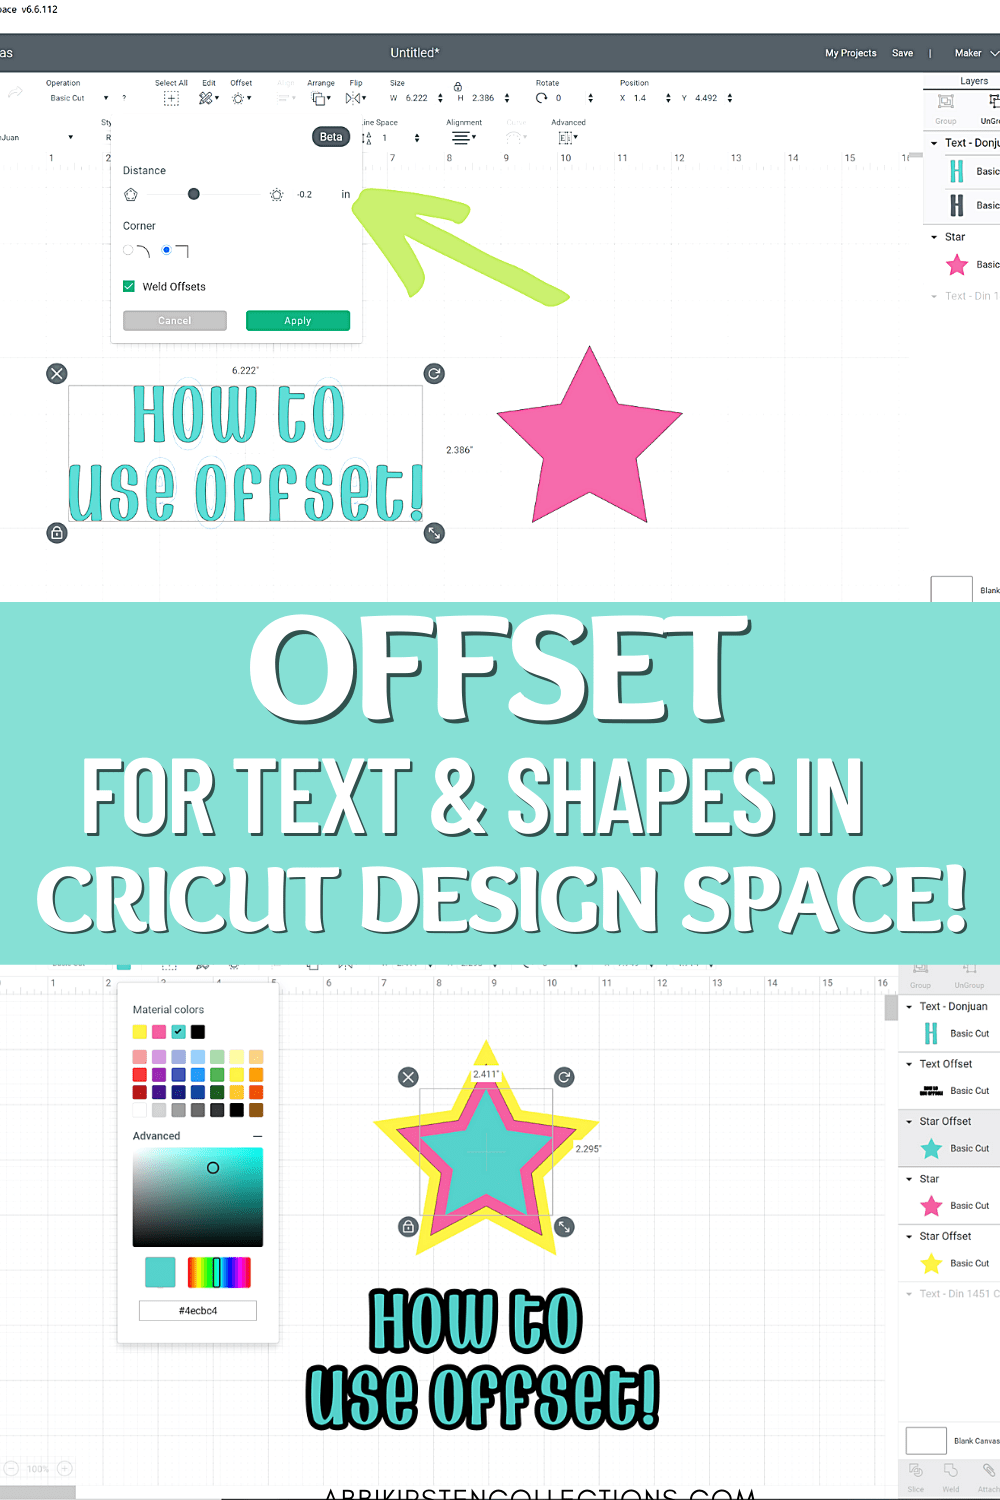 How to Use Offset in Cricut Design Space to Create Layers and Shadows!